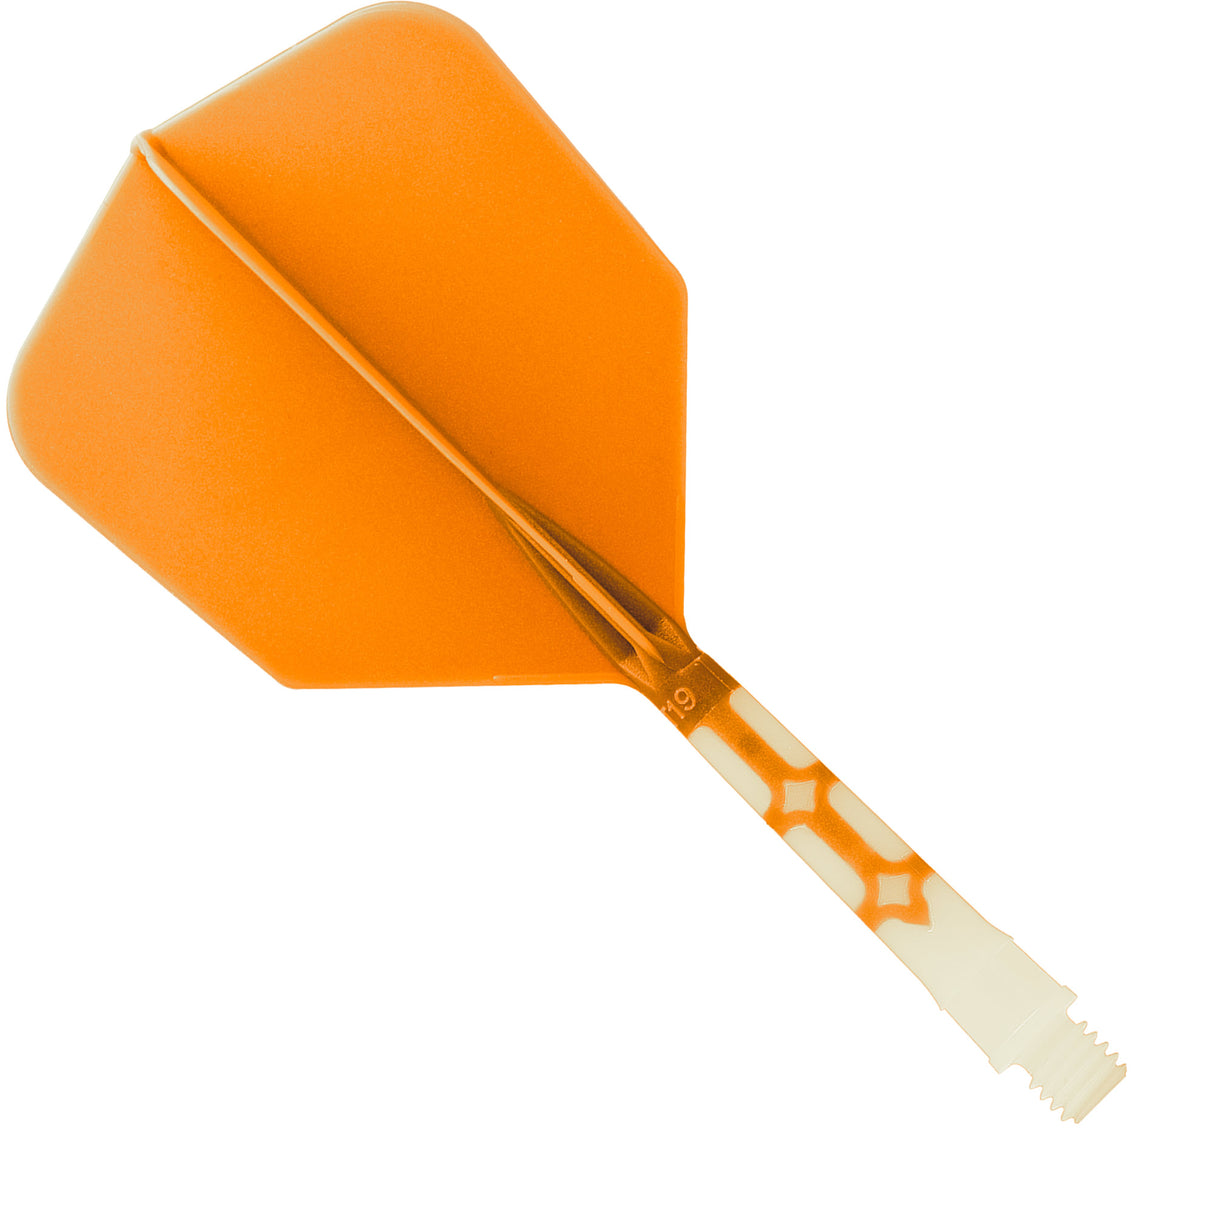 *Cuesoul Rost T19 Integrated Dart Shaft and Flights - Big Wing - White with Orange Flight